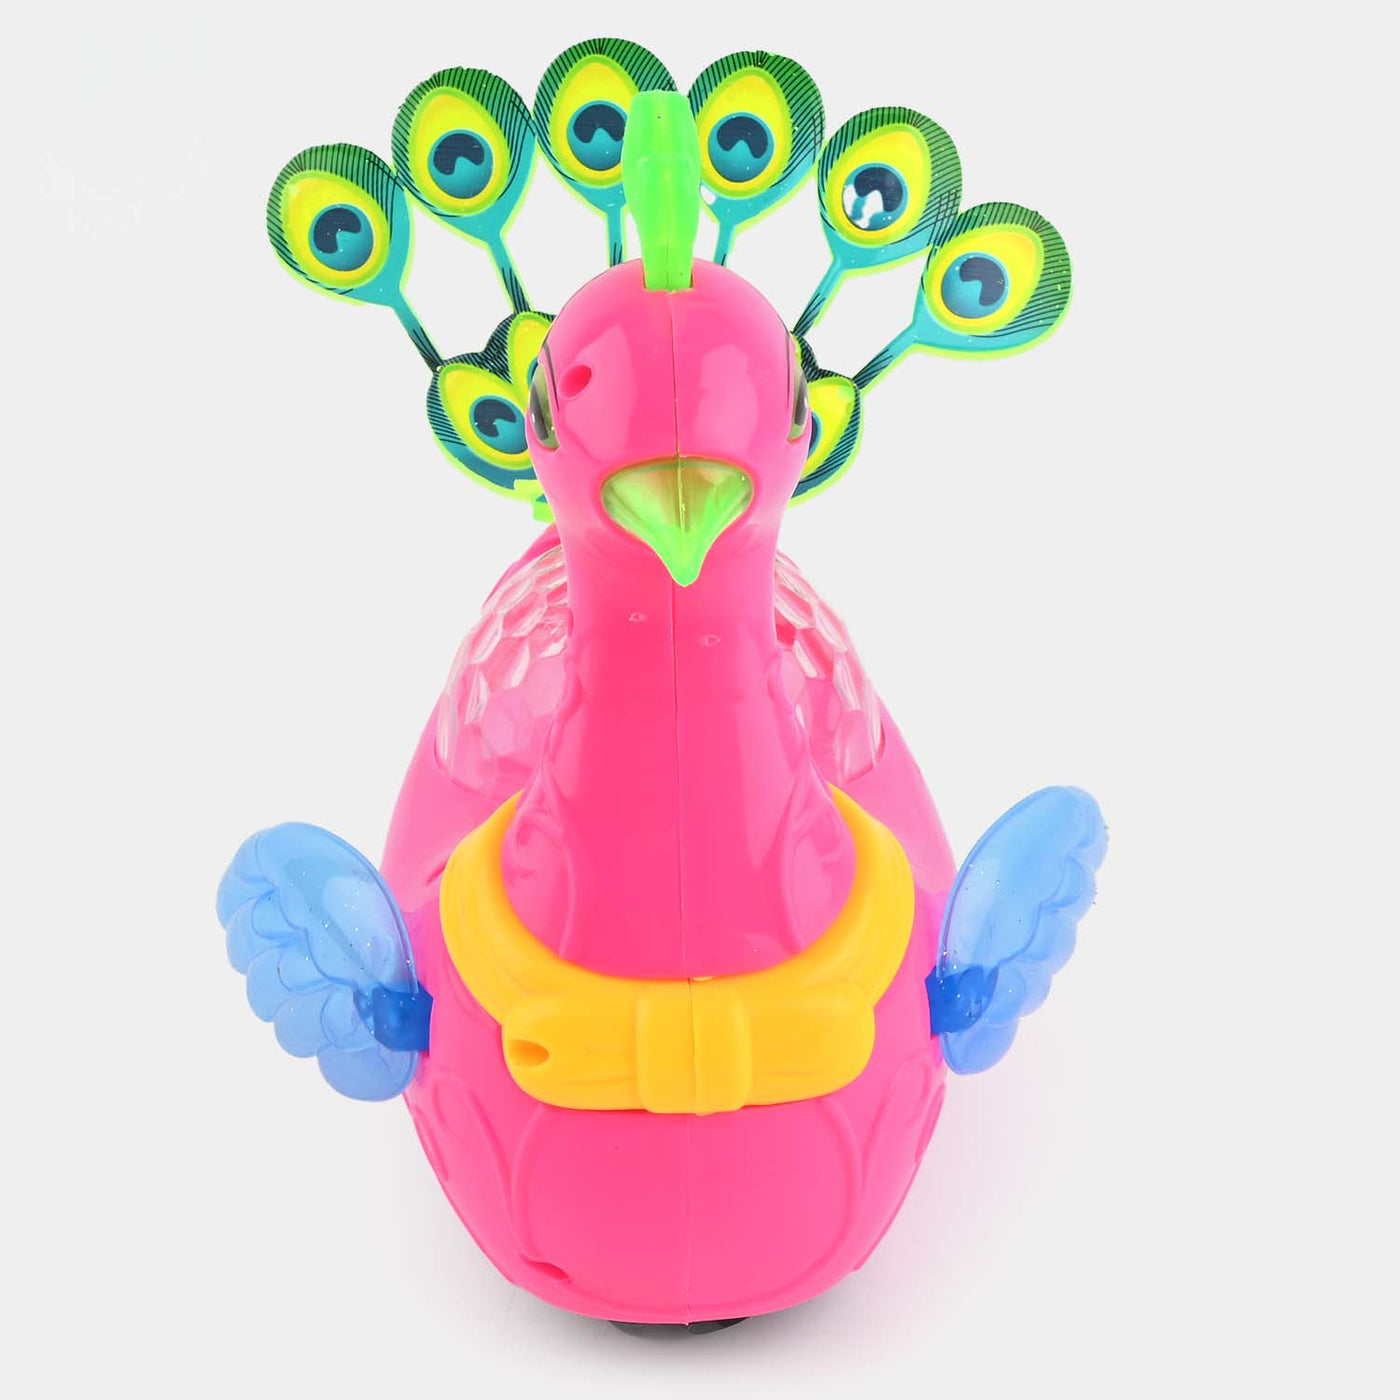 Light & Musical Peacock Toy For Kids